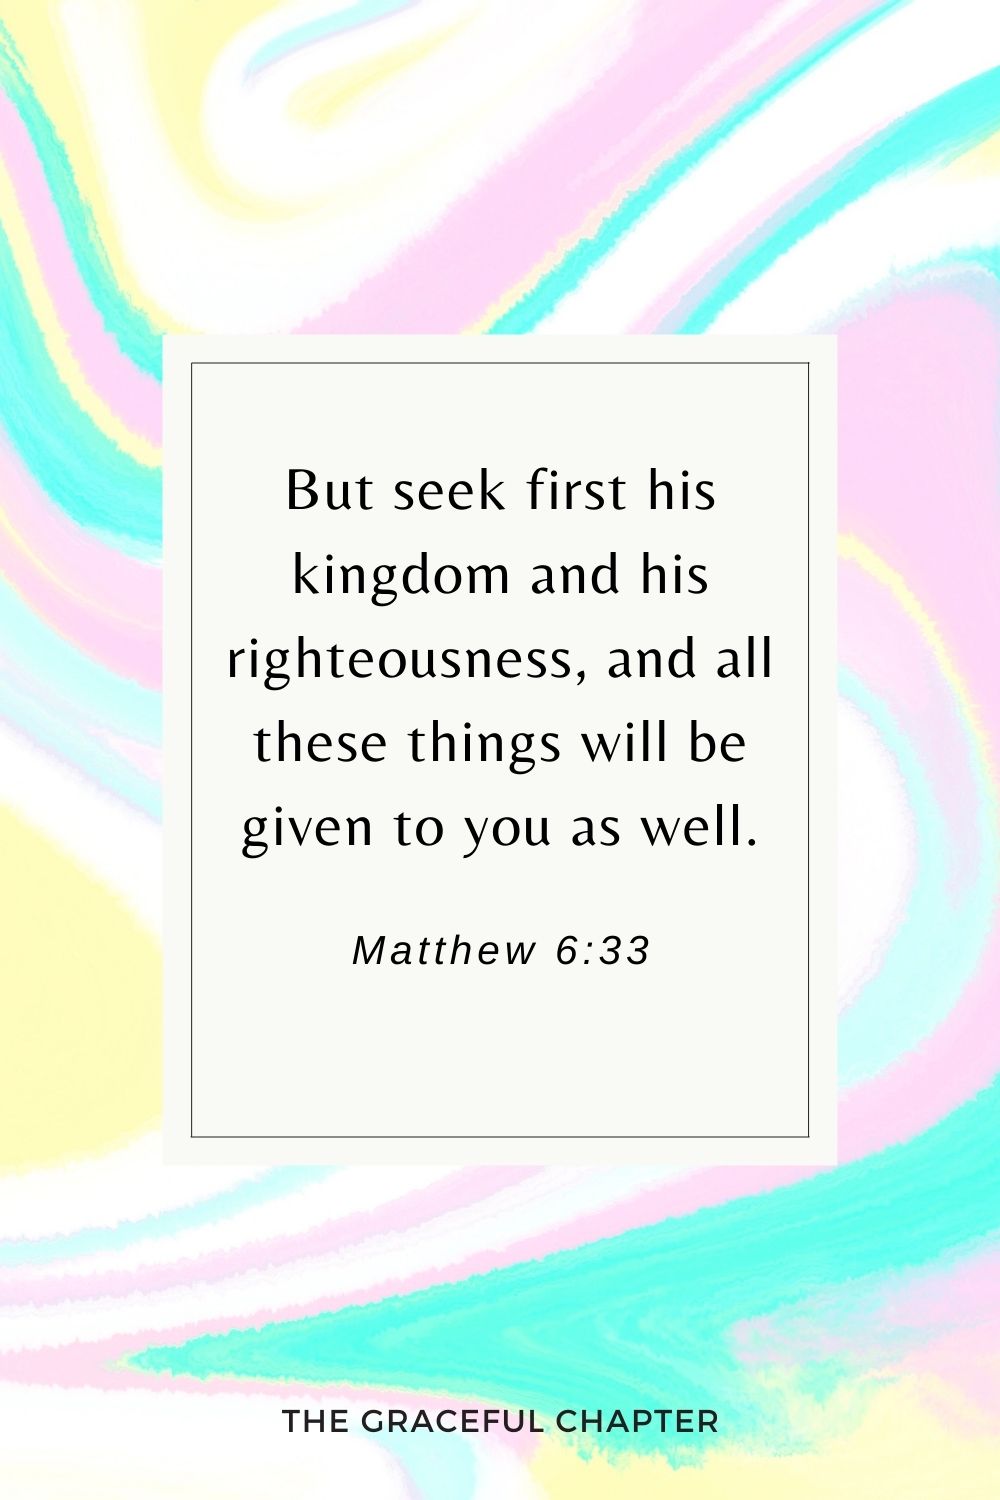 But seek first his kingdom and his righteousness, and all these things will be given to you as well. Matthew 6:33